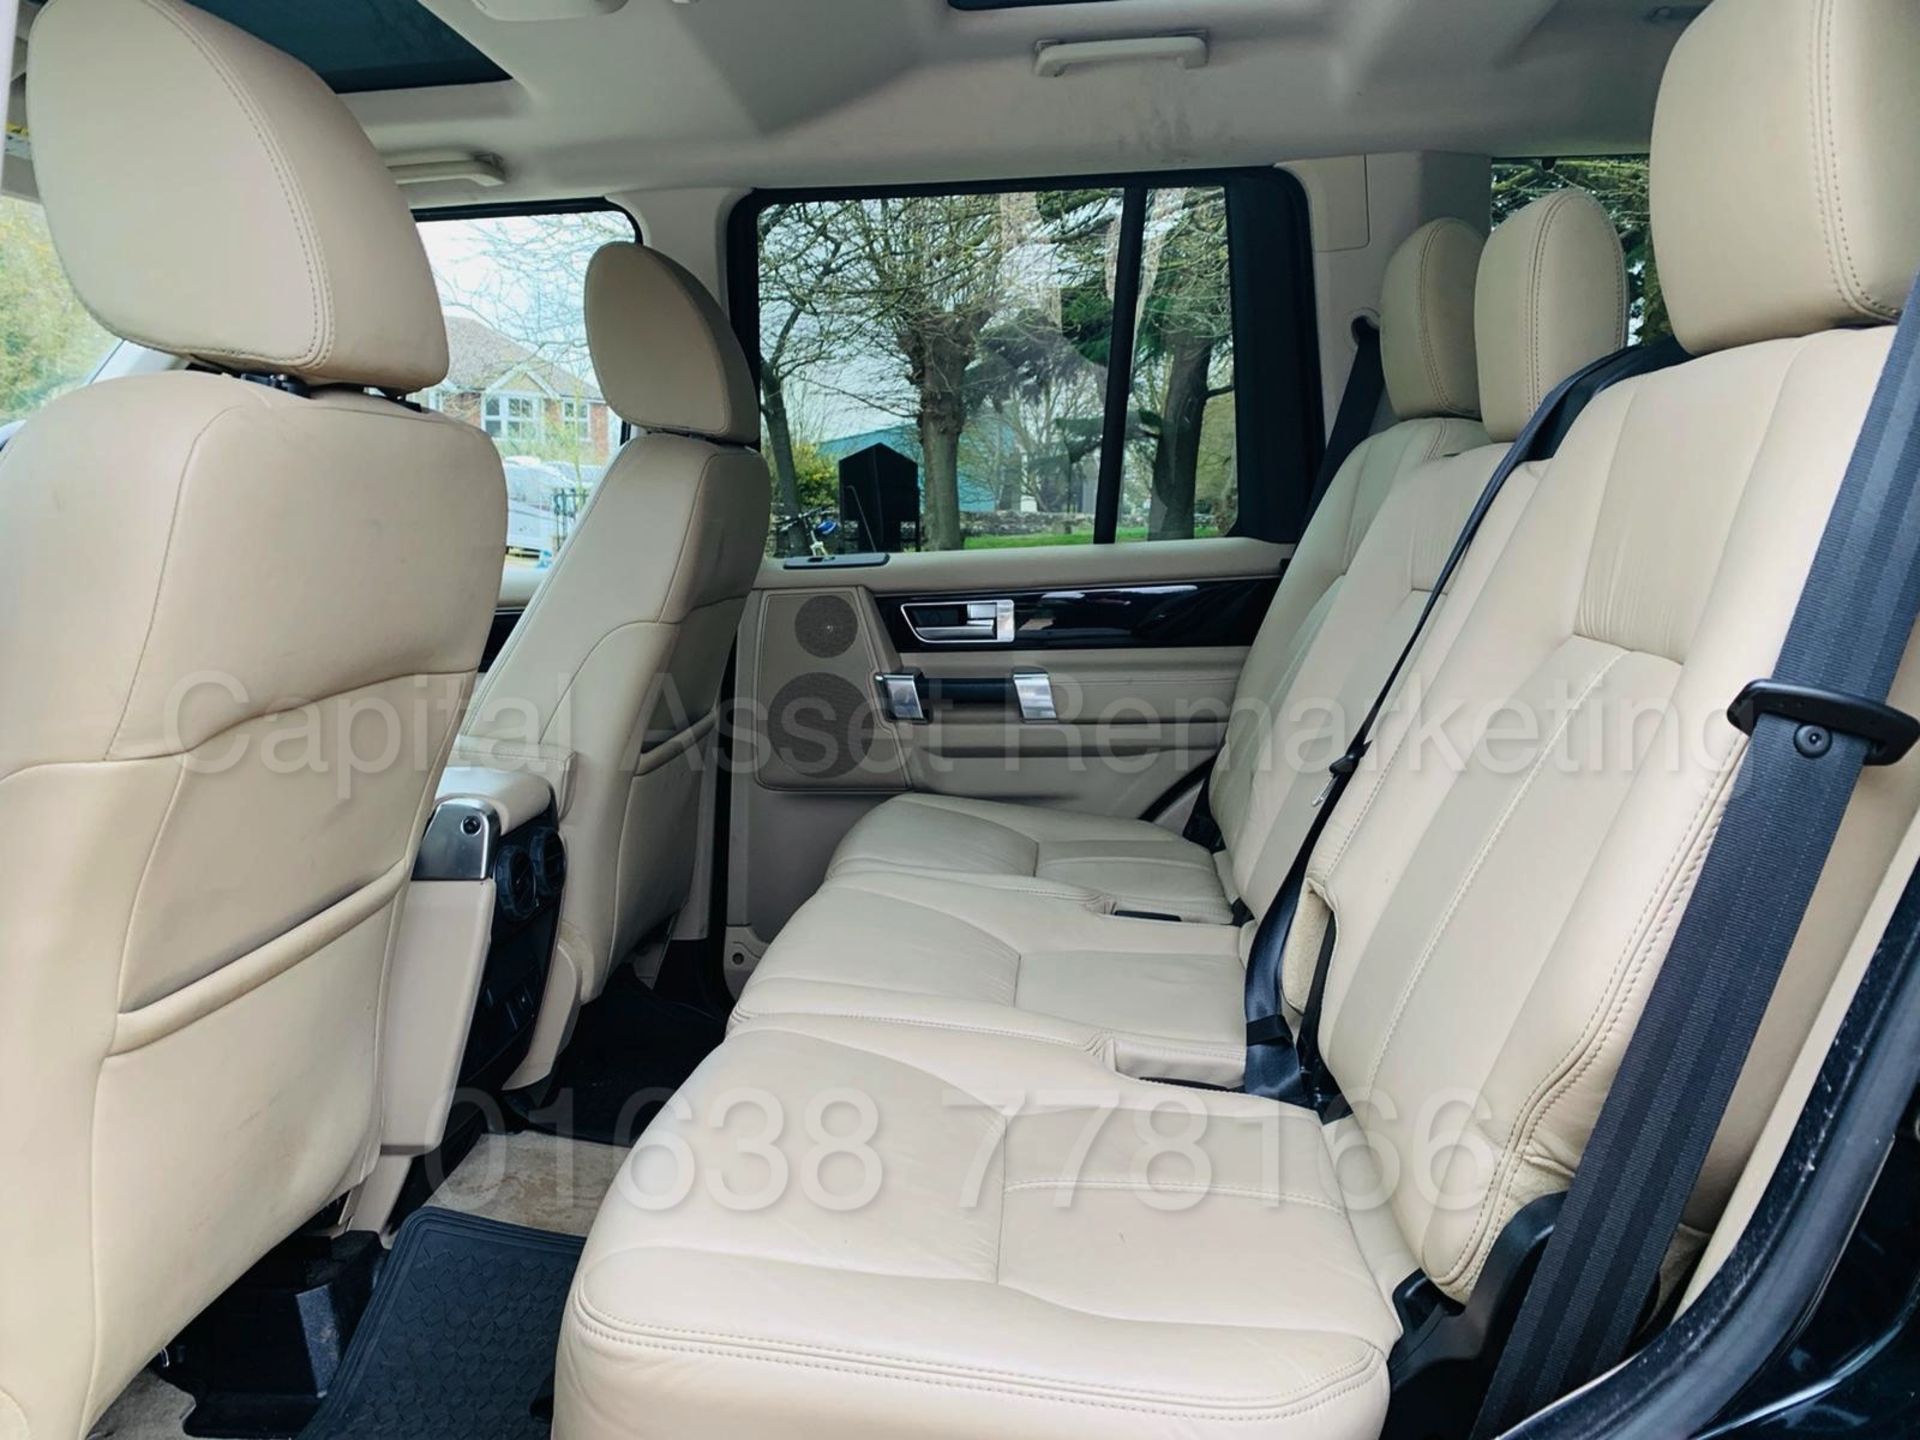 LAND ROVER DISCOVERY *HSE EDITION* 7 SEATER SUV (2012 MODEL) '3.0 SDV6- 8 SPEED AUTO' **HUGE SPEC** - Image 20 of 48